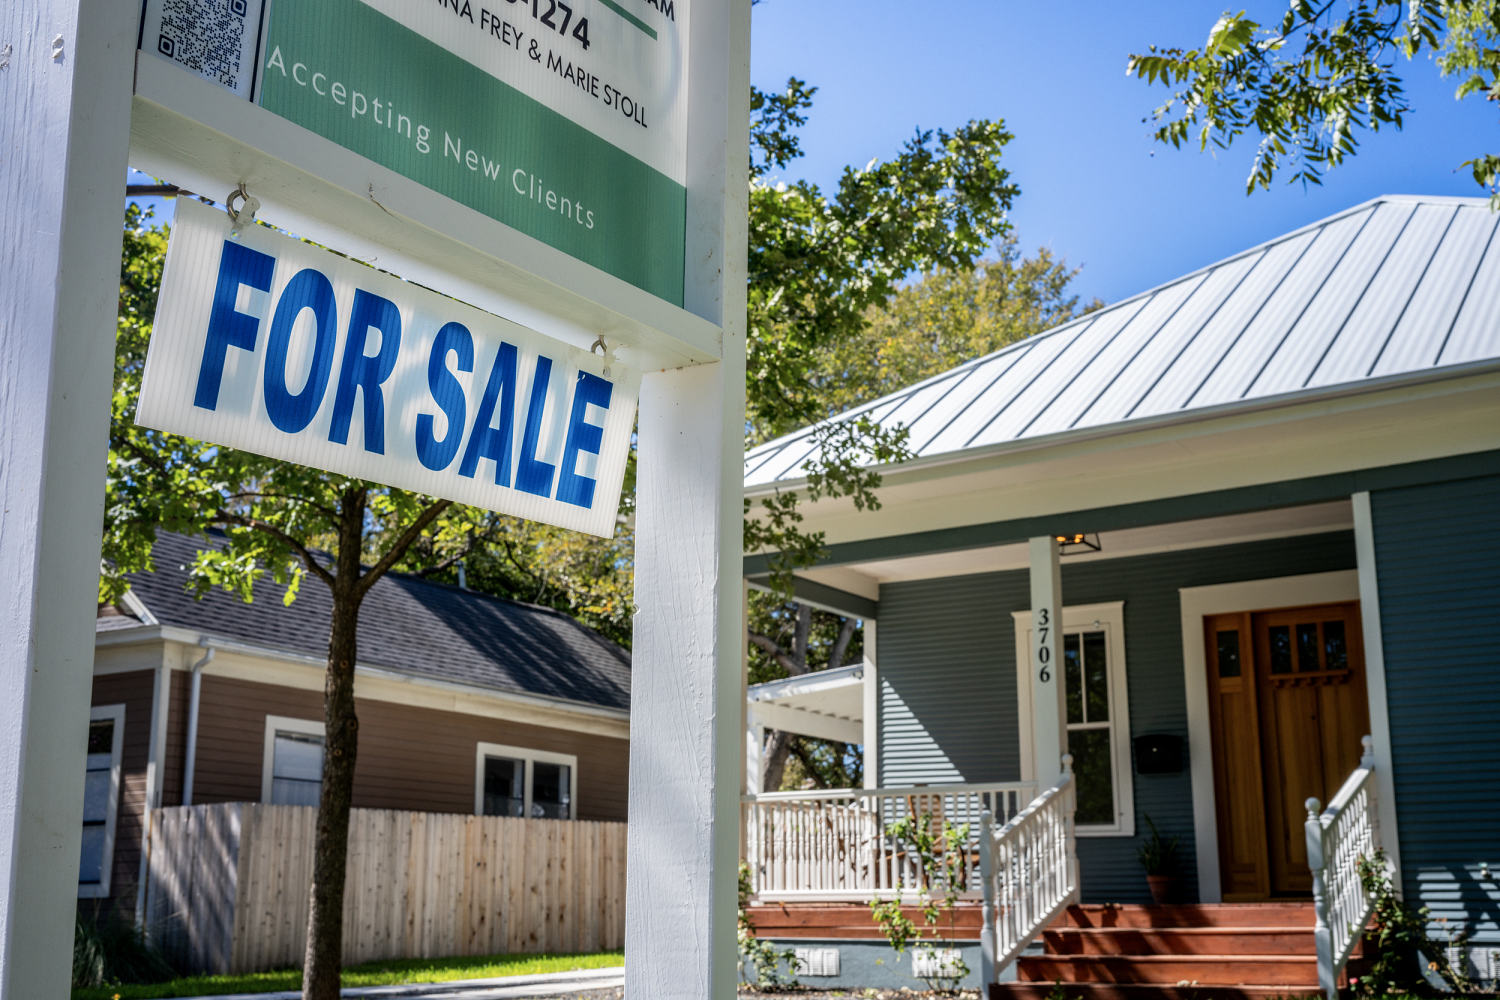 Mortgage rates are now at the highest level of the year, and could still climb